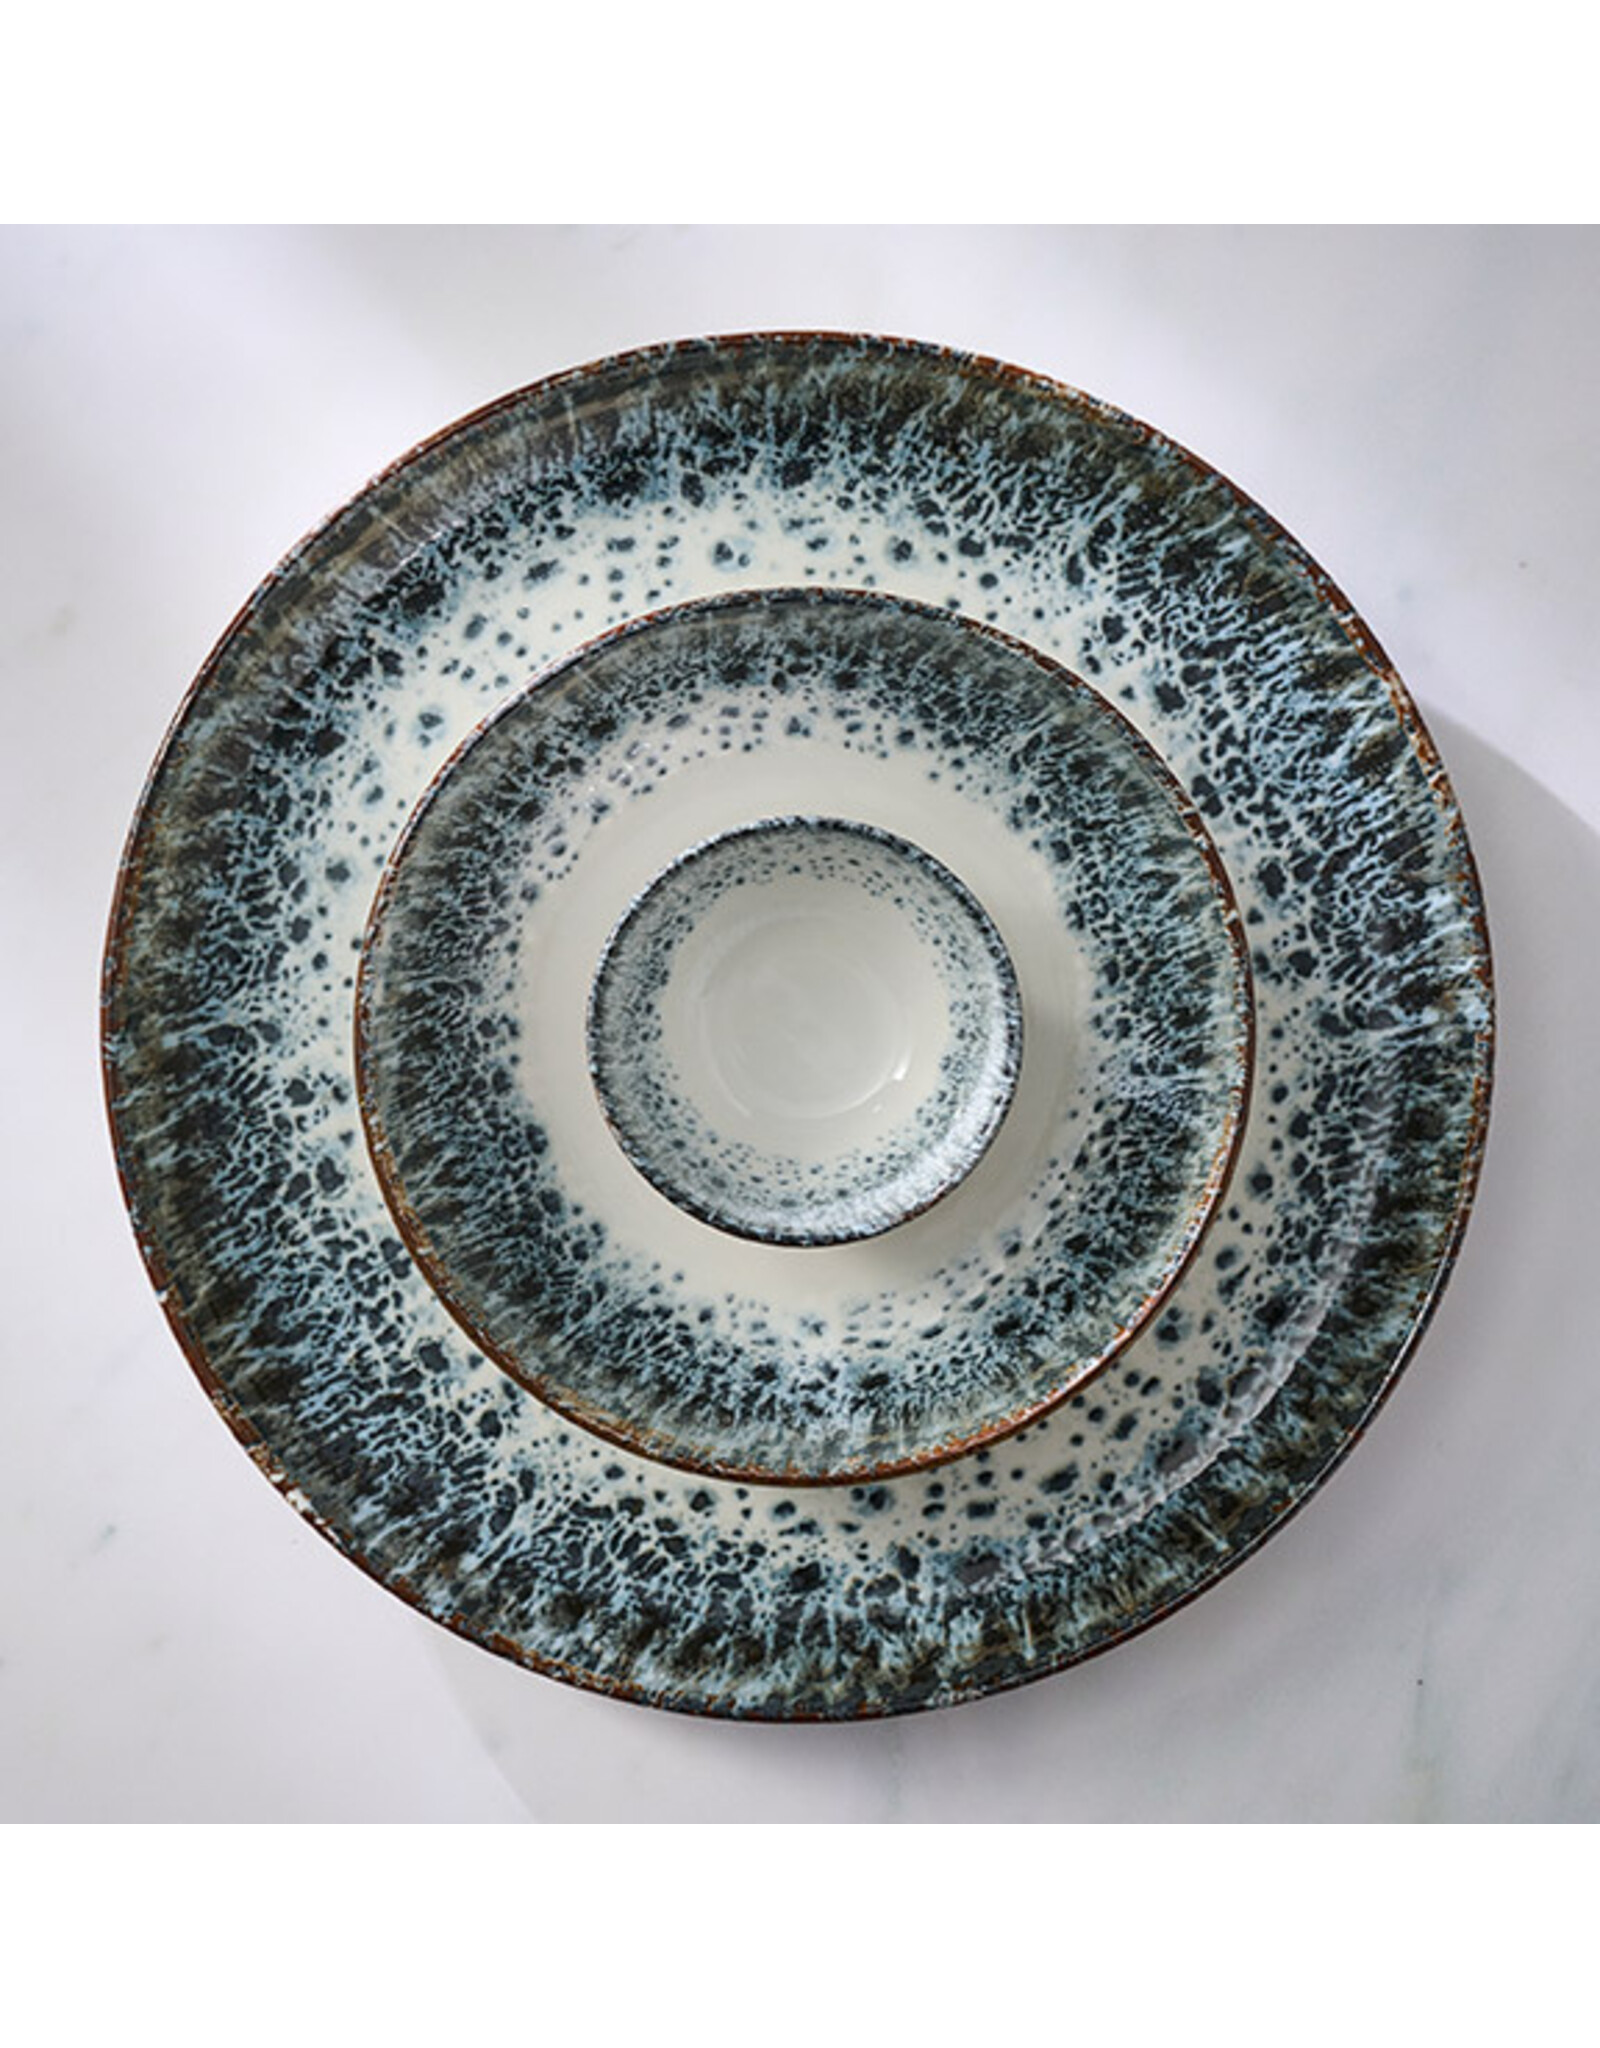 Stylepoint Reef coupe plate 18 cm